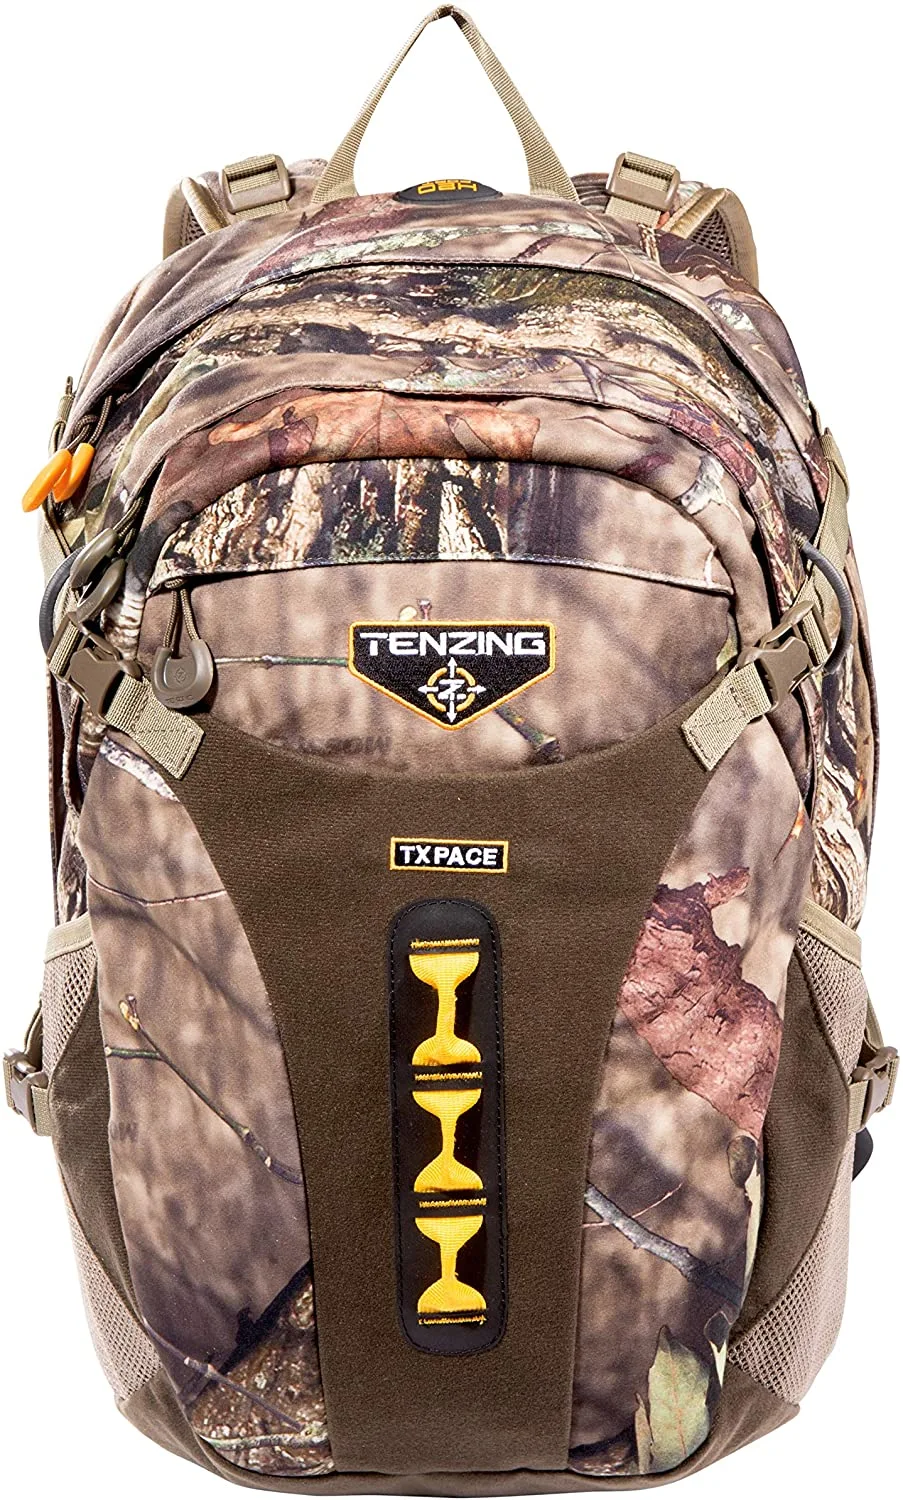 Super Light Outdoor Hunting Backpack, Camo